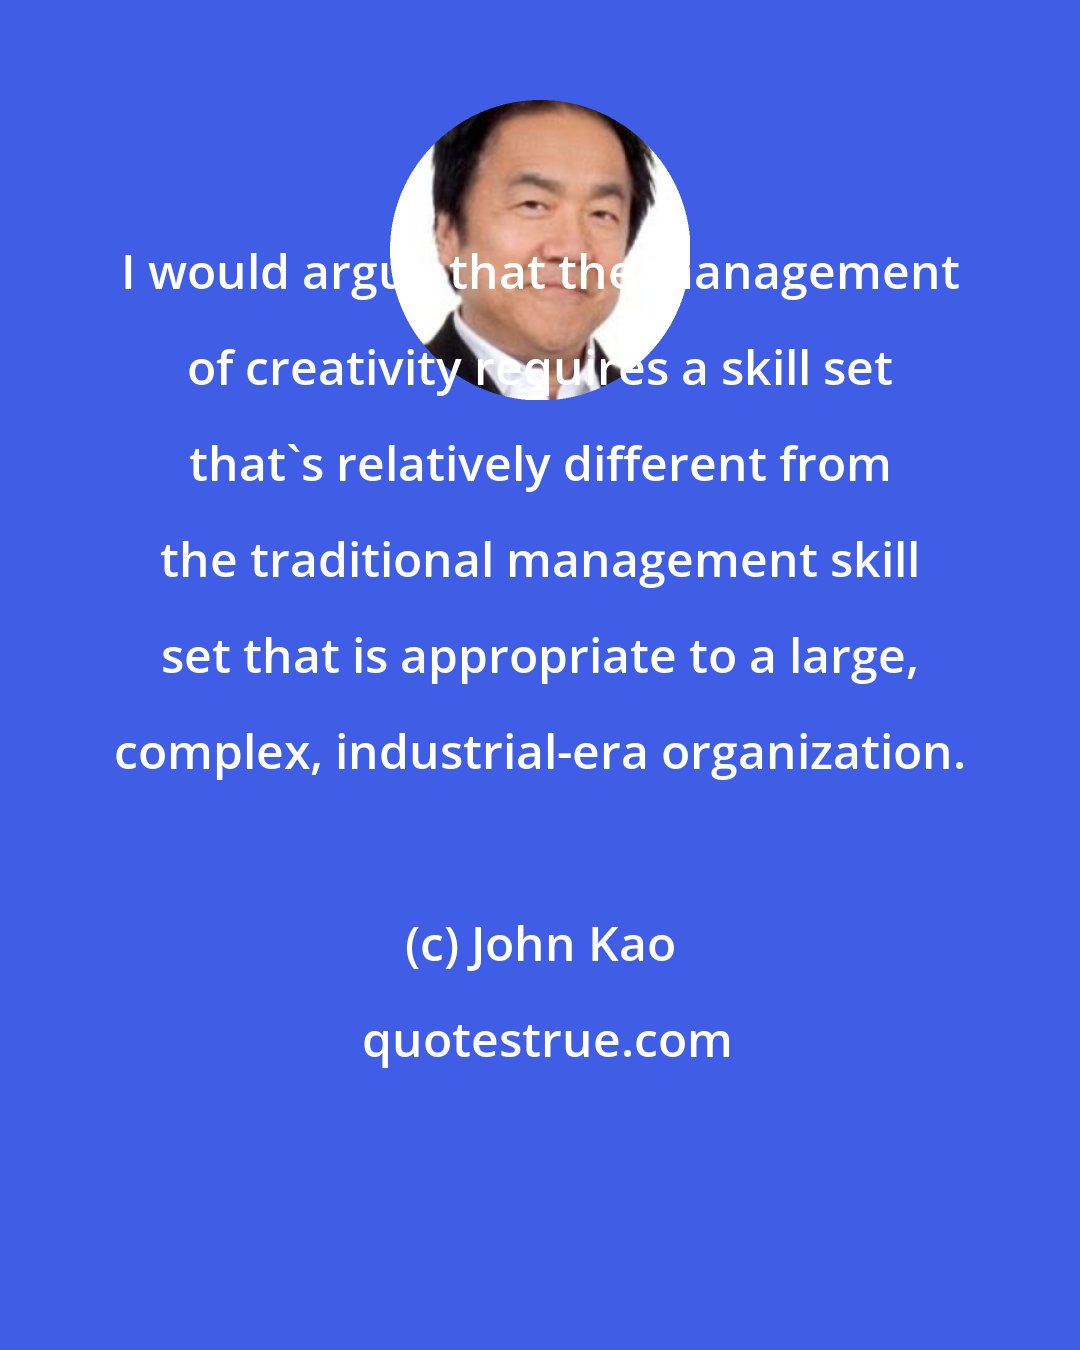 John Kao: I would argue that the management of creativity requires a skill set that's relatively different from the traditional management skill set that is appropriate to a large, complex, industrial-era organization.